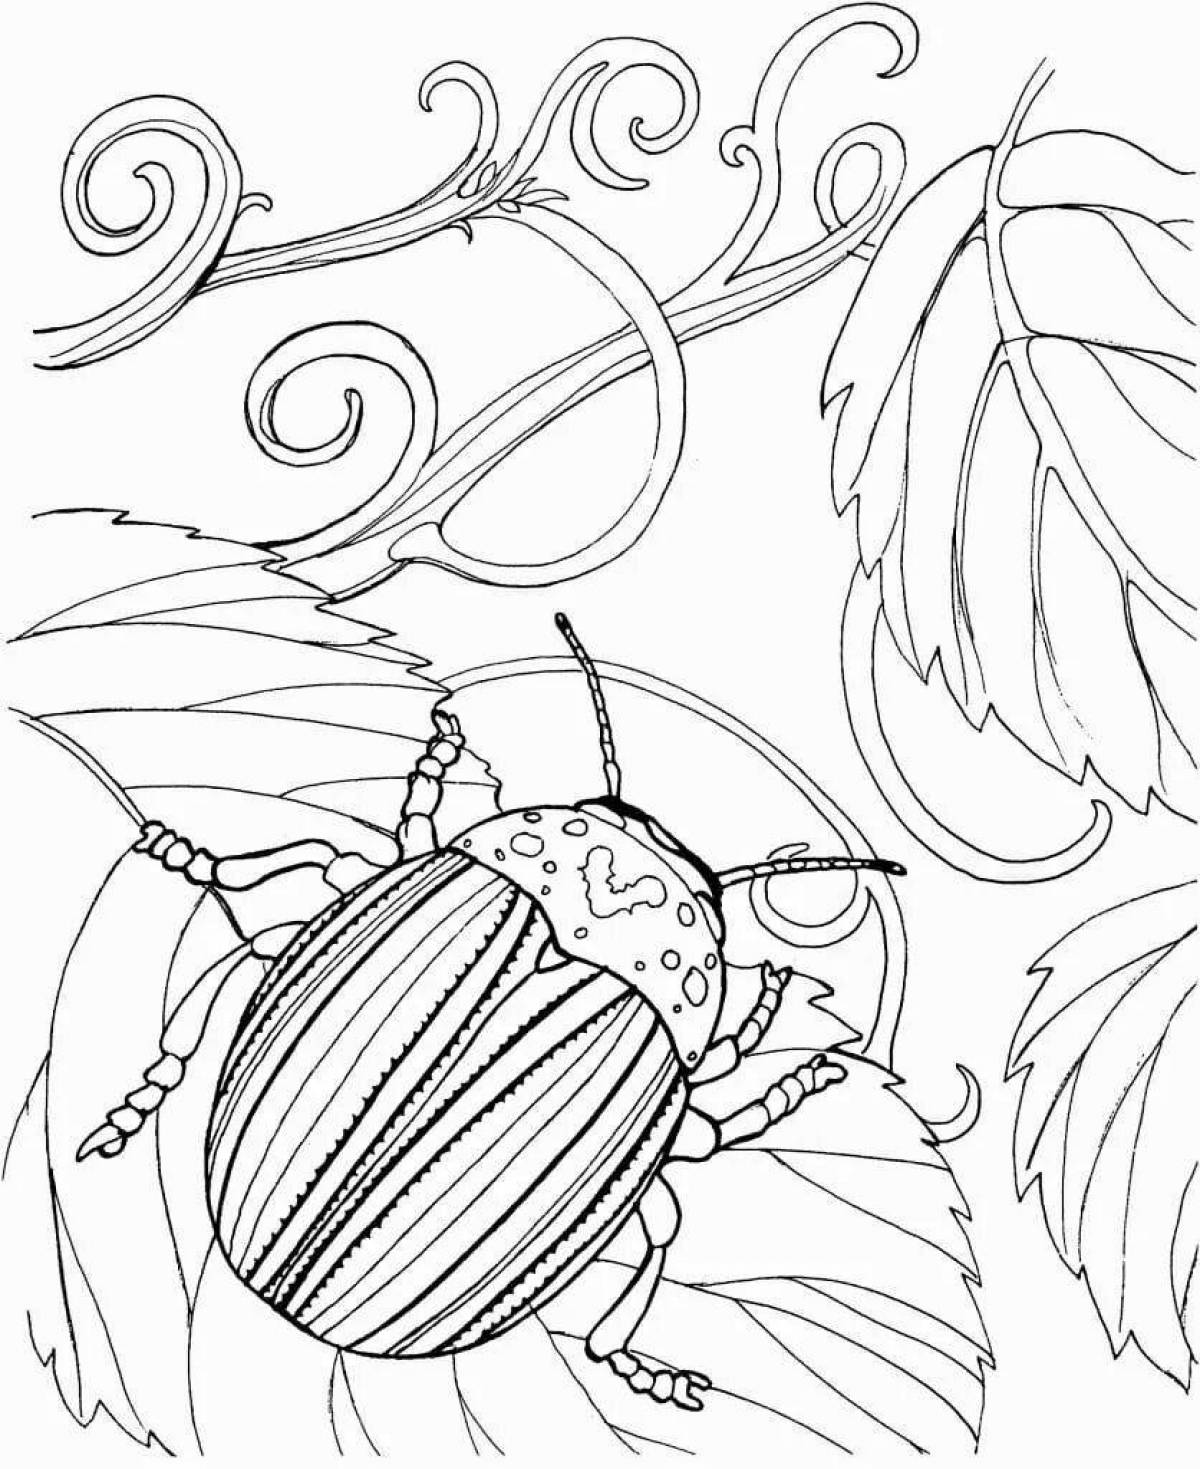 Innovative insect coloring page for 6-7 year olds